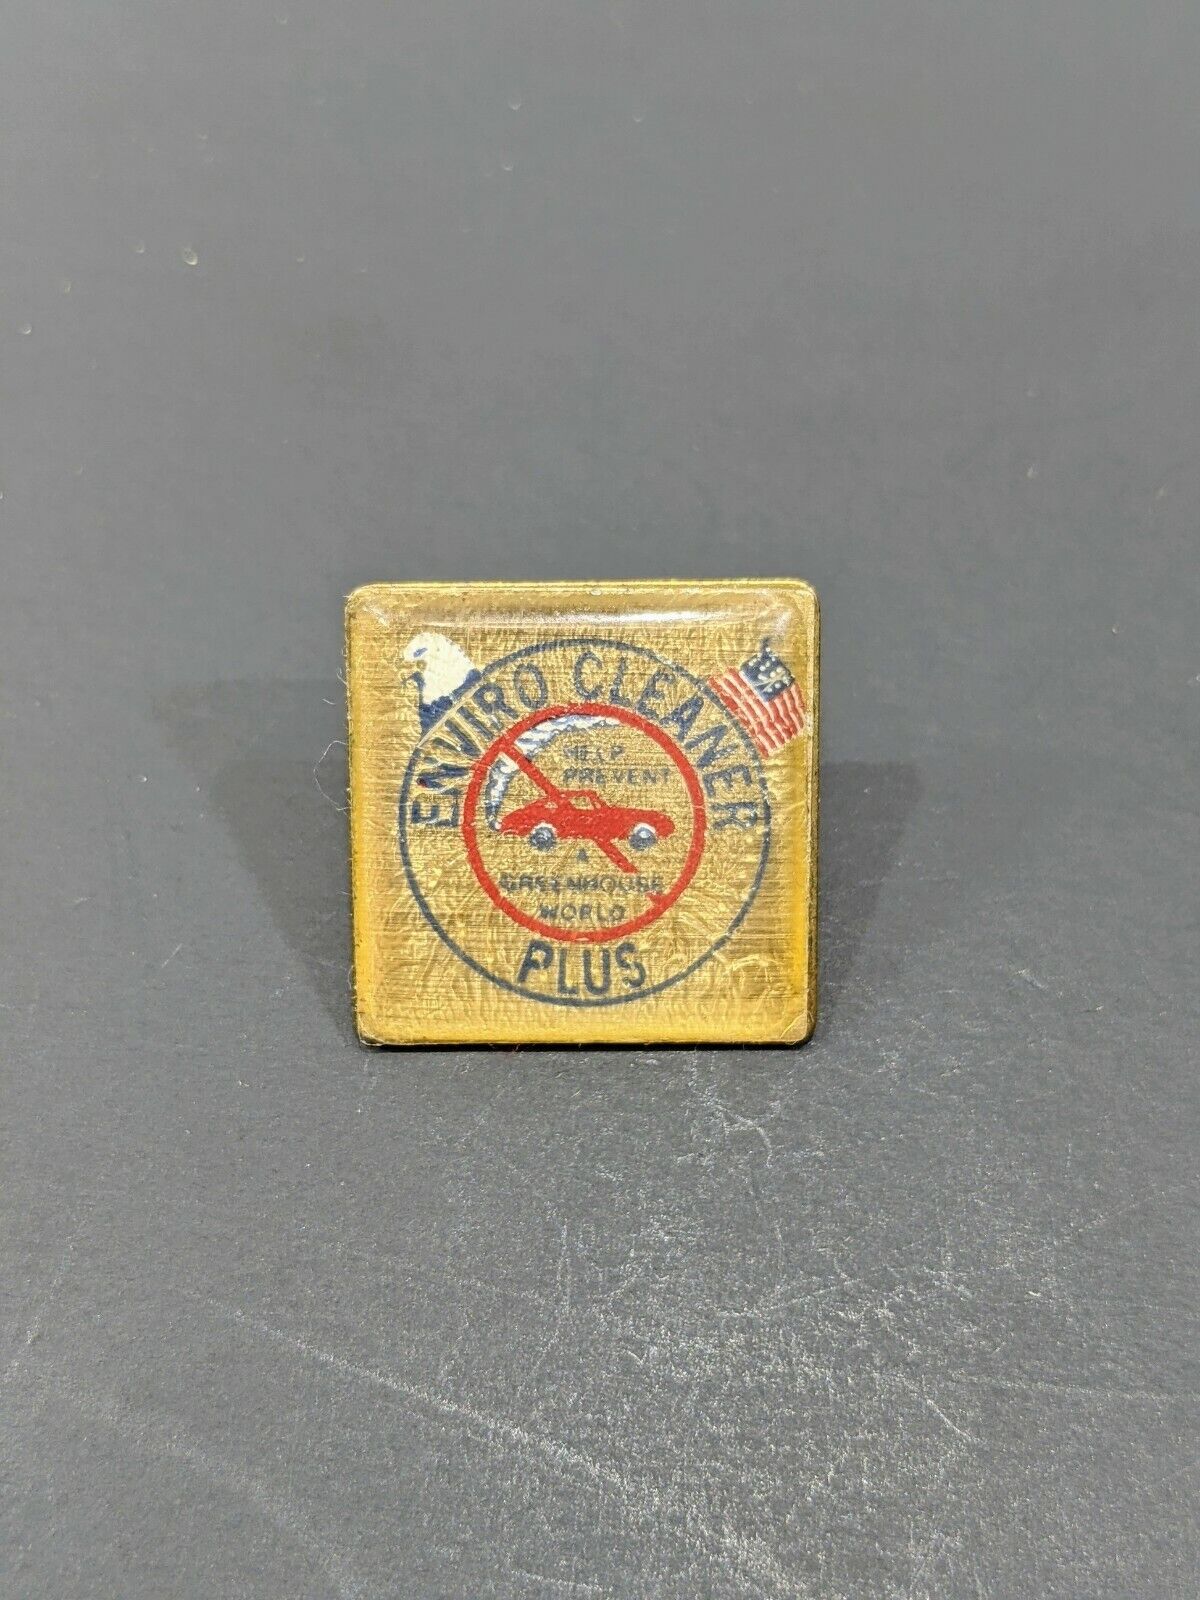 Enviro Cleaner Plus Environmental Activism Extremely Rare Vintage Trading Pin